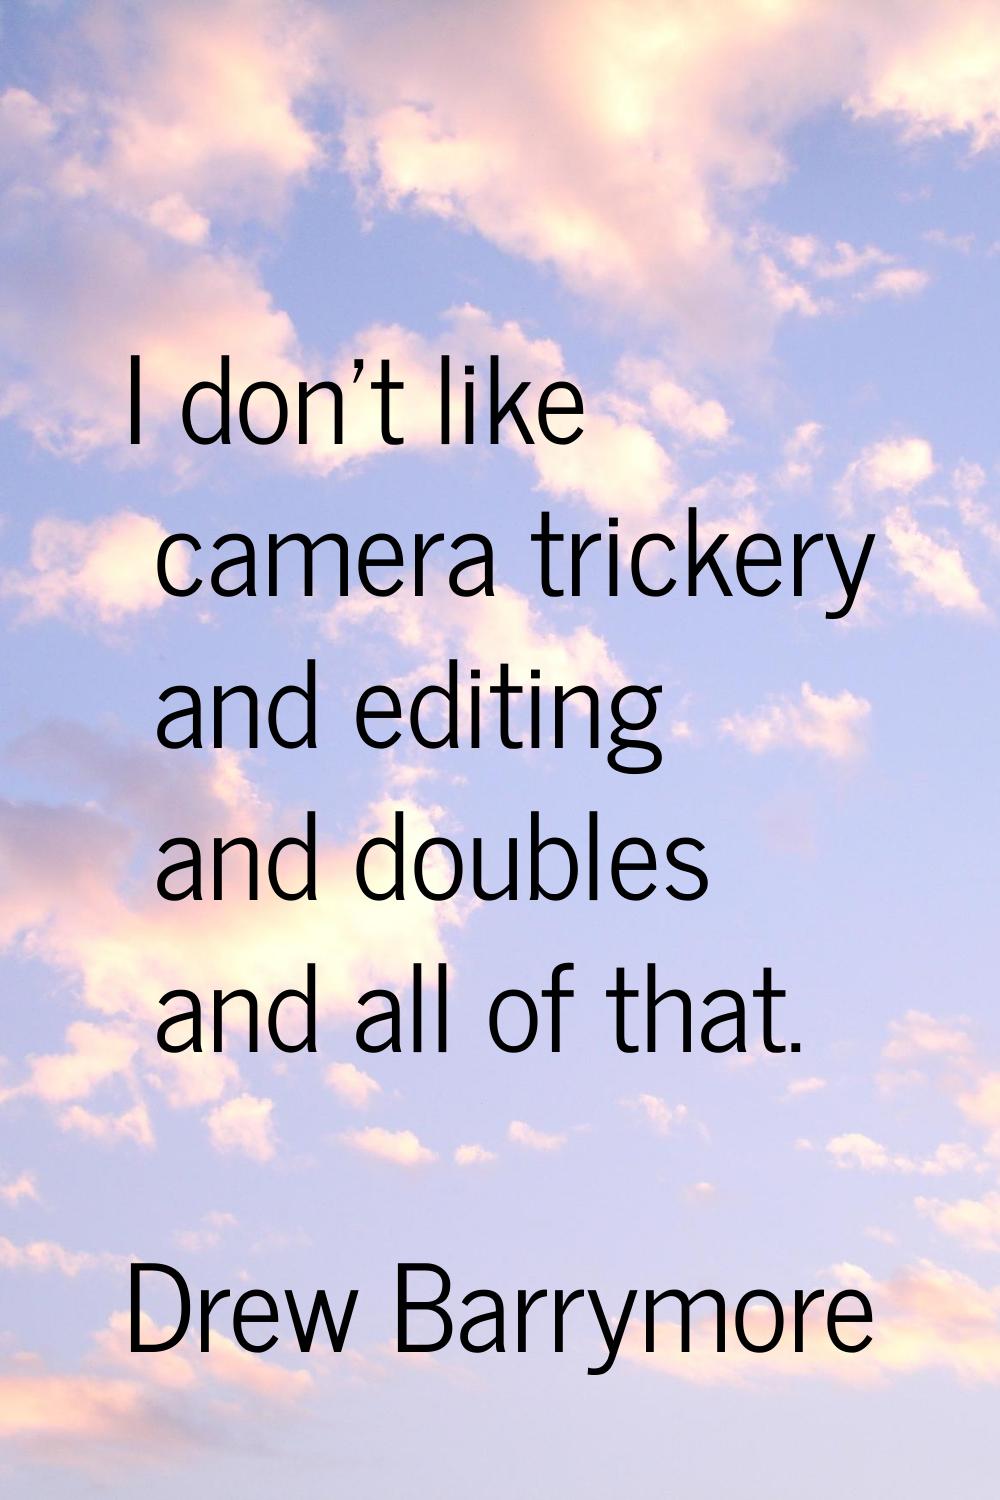 I don't like camera trickery and editing and doubles and all of that.